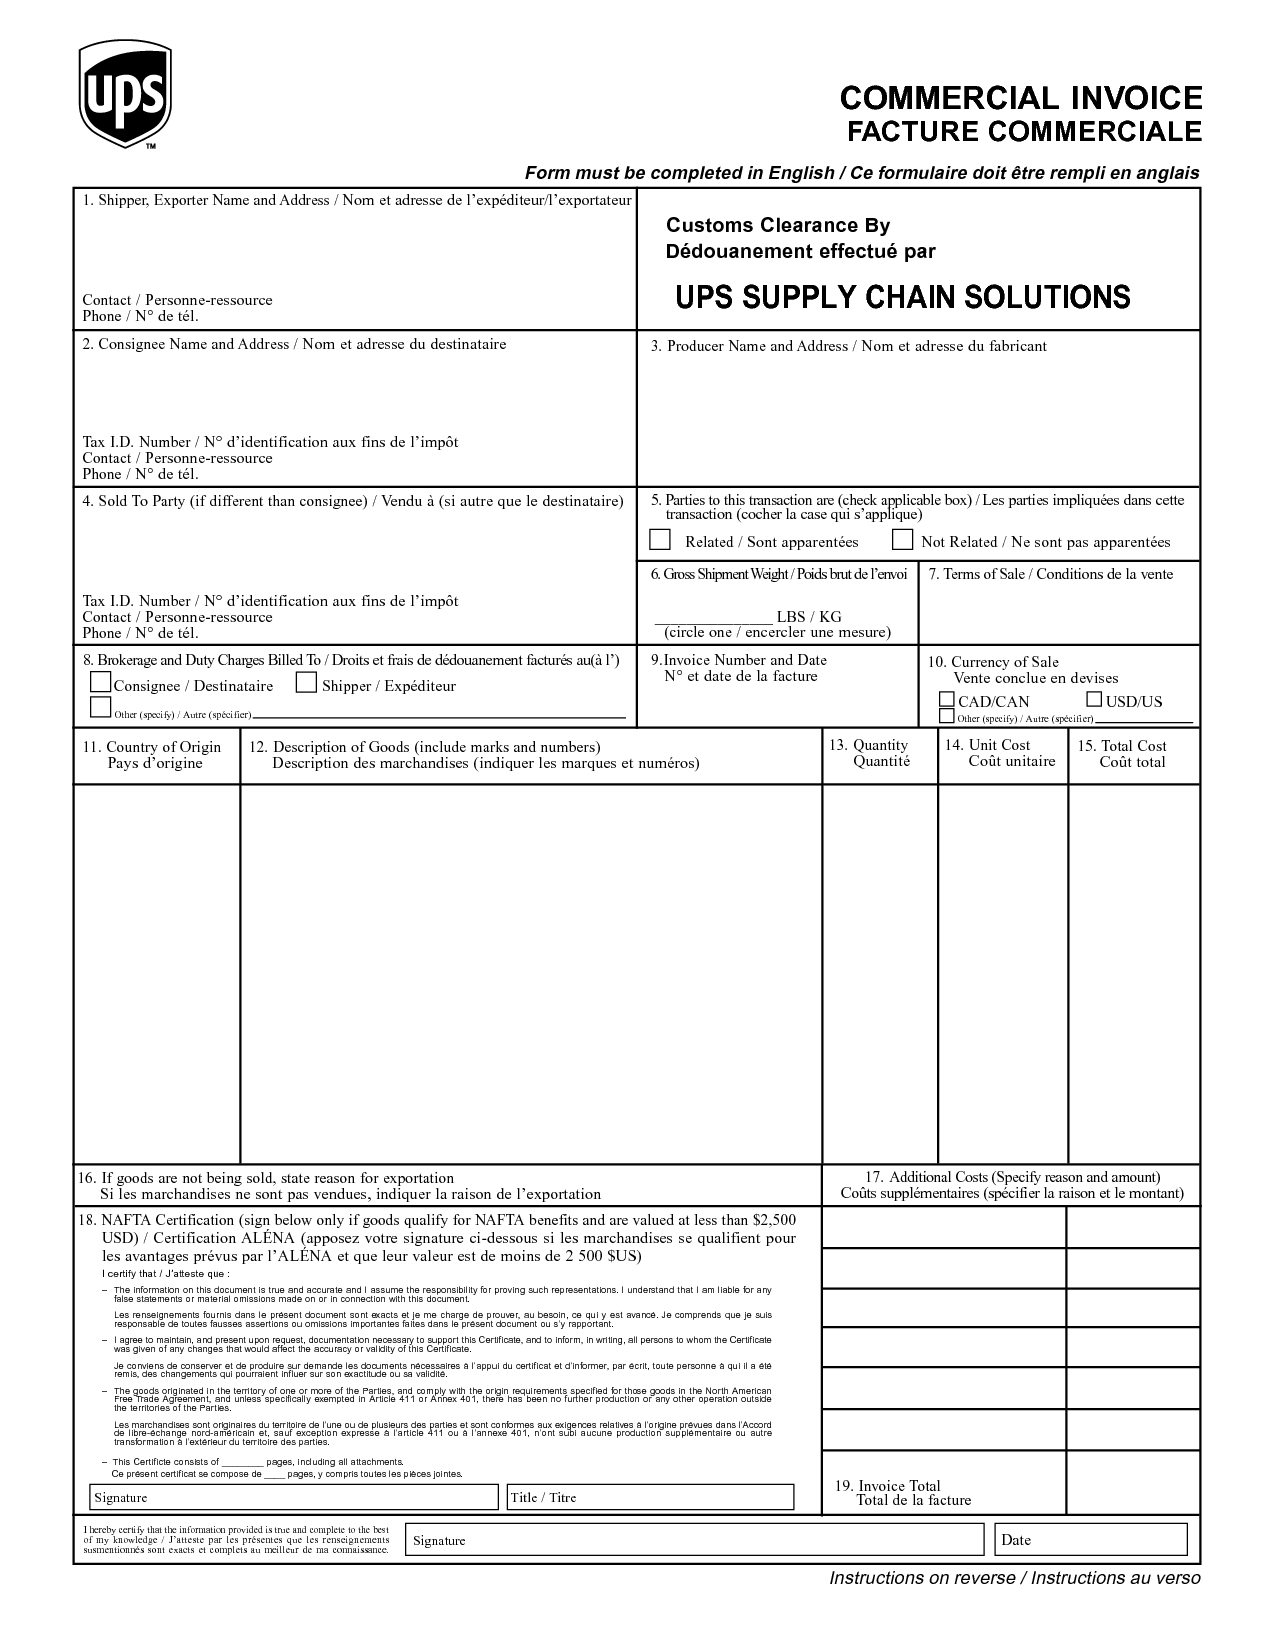 ups commercial invoice template invoice template ideas nafta commercial invoice